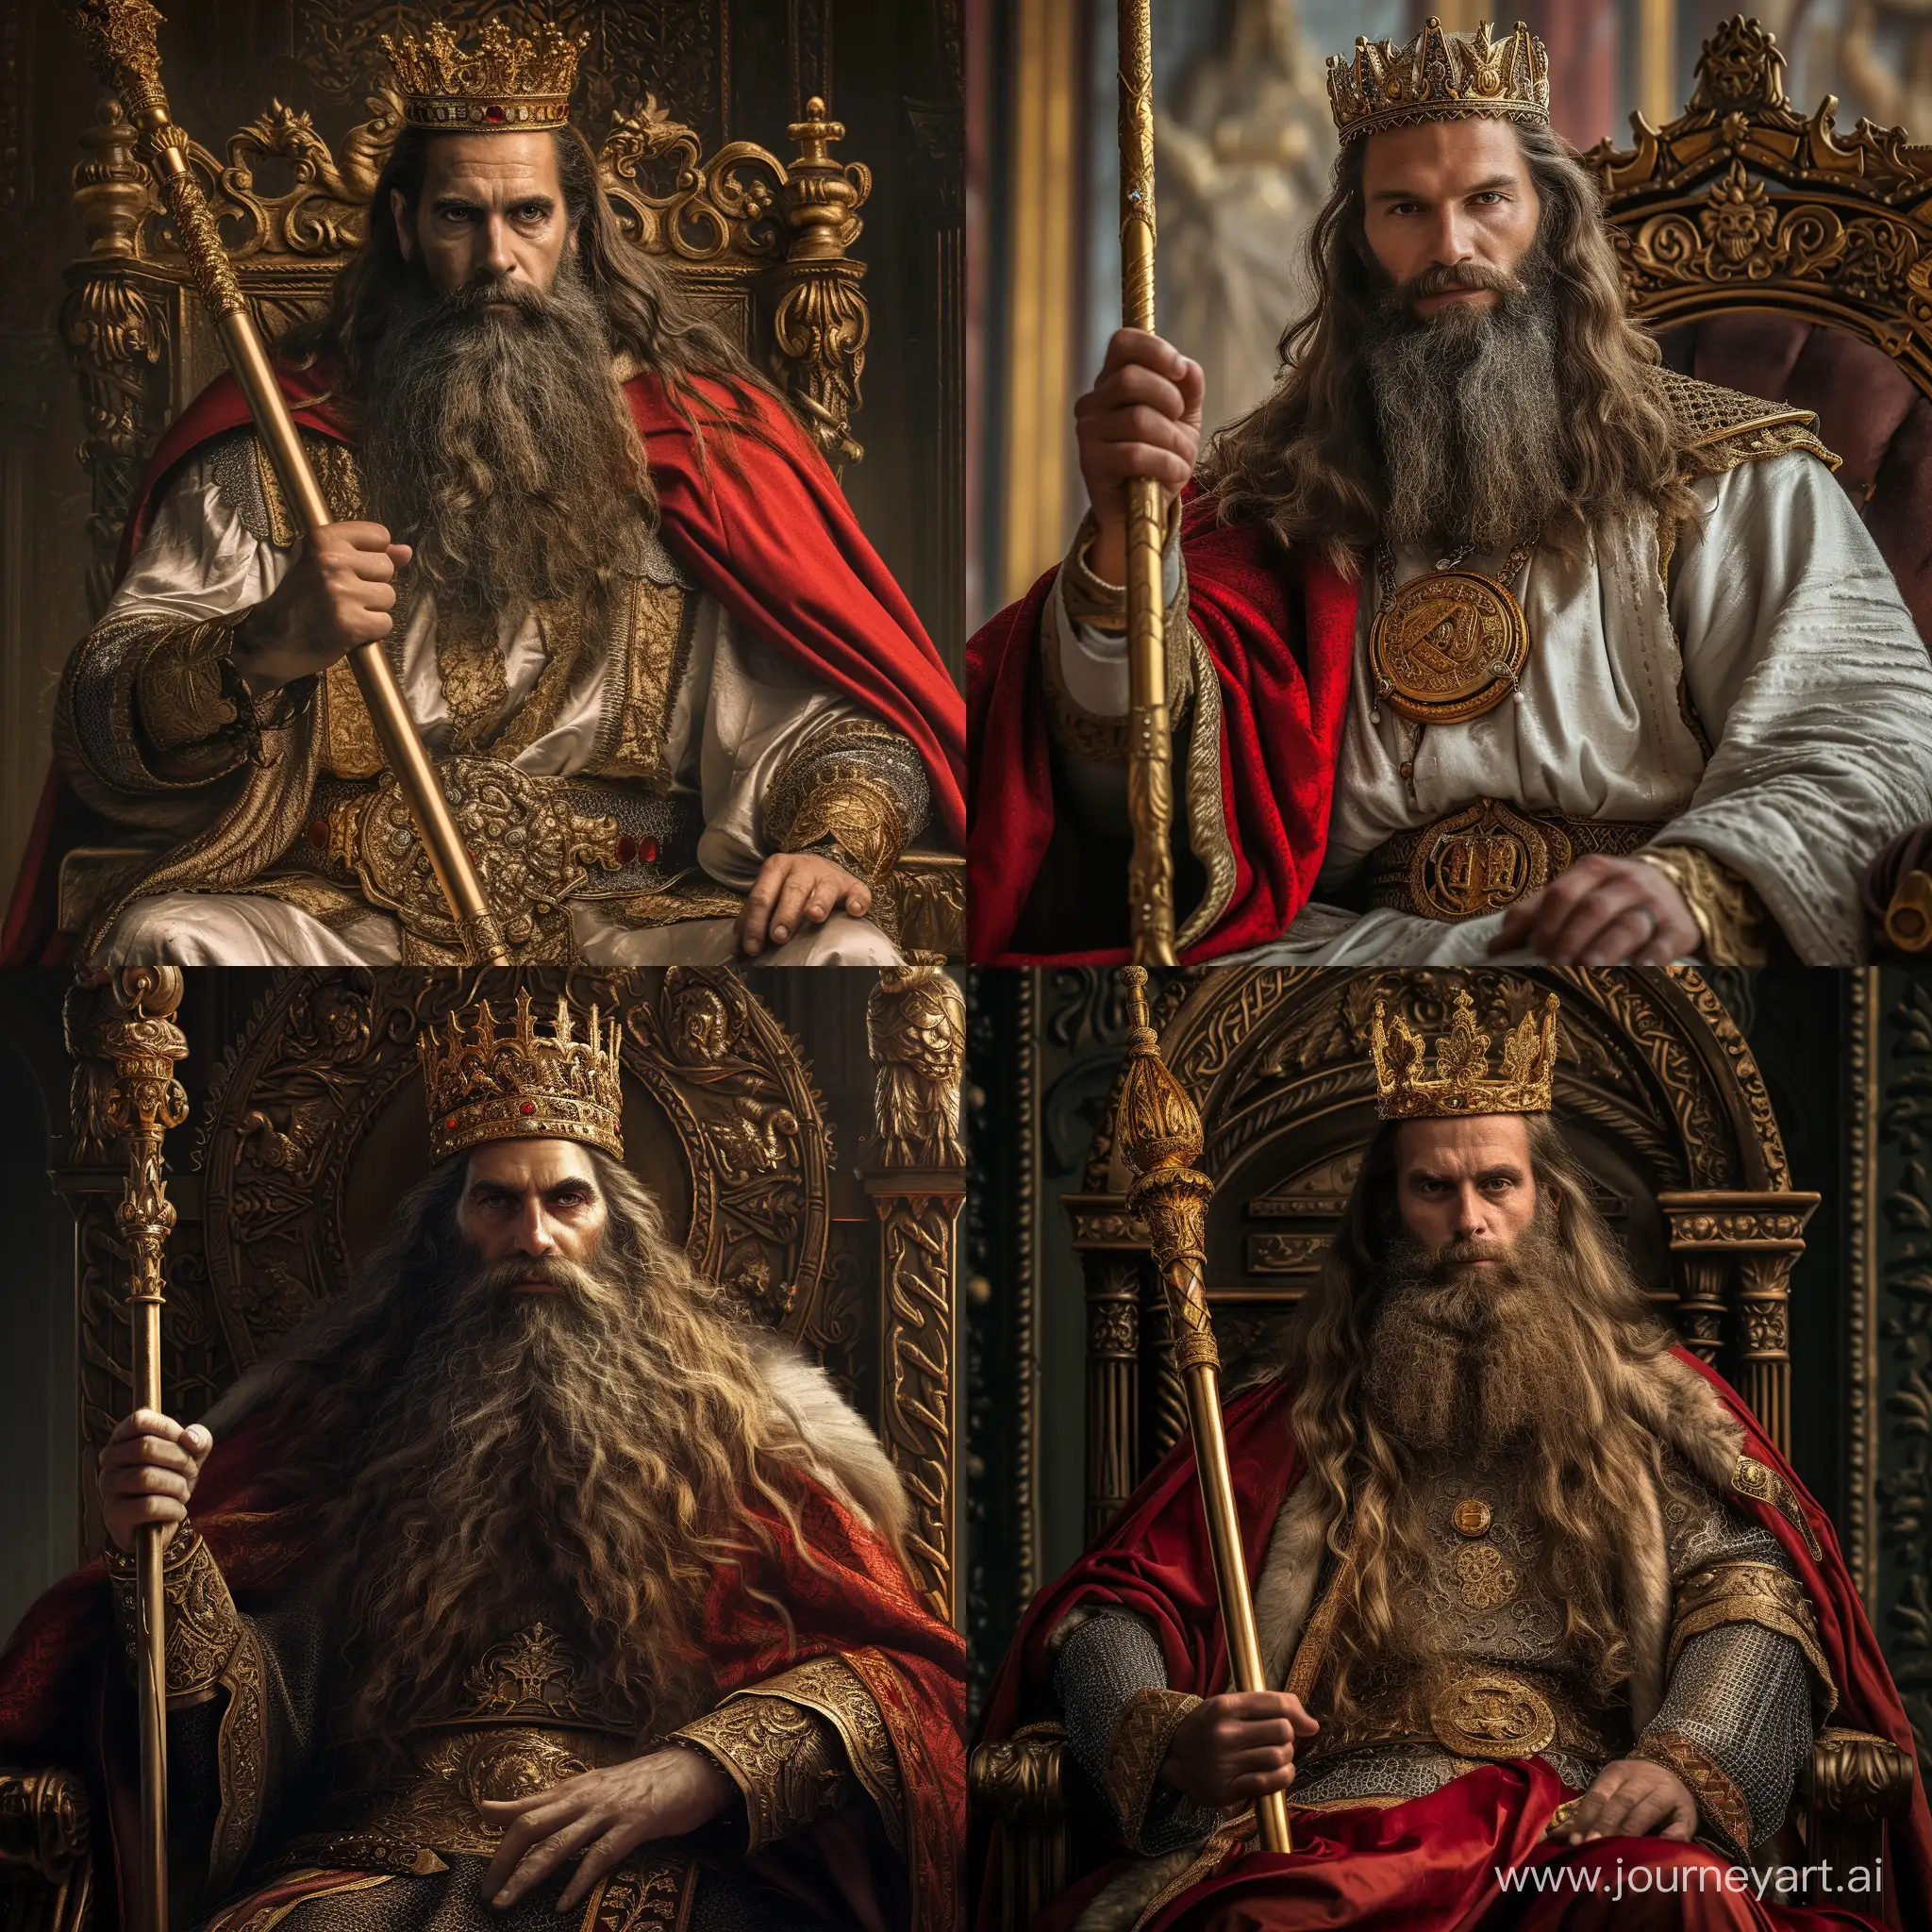 Clovis I King of Franks. He has long beard and hair. He is sitting on throne. Wearing luxury robe, golden king crown and red cloak. He has a long golden staff on his hand. In palace. Realistic image.